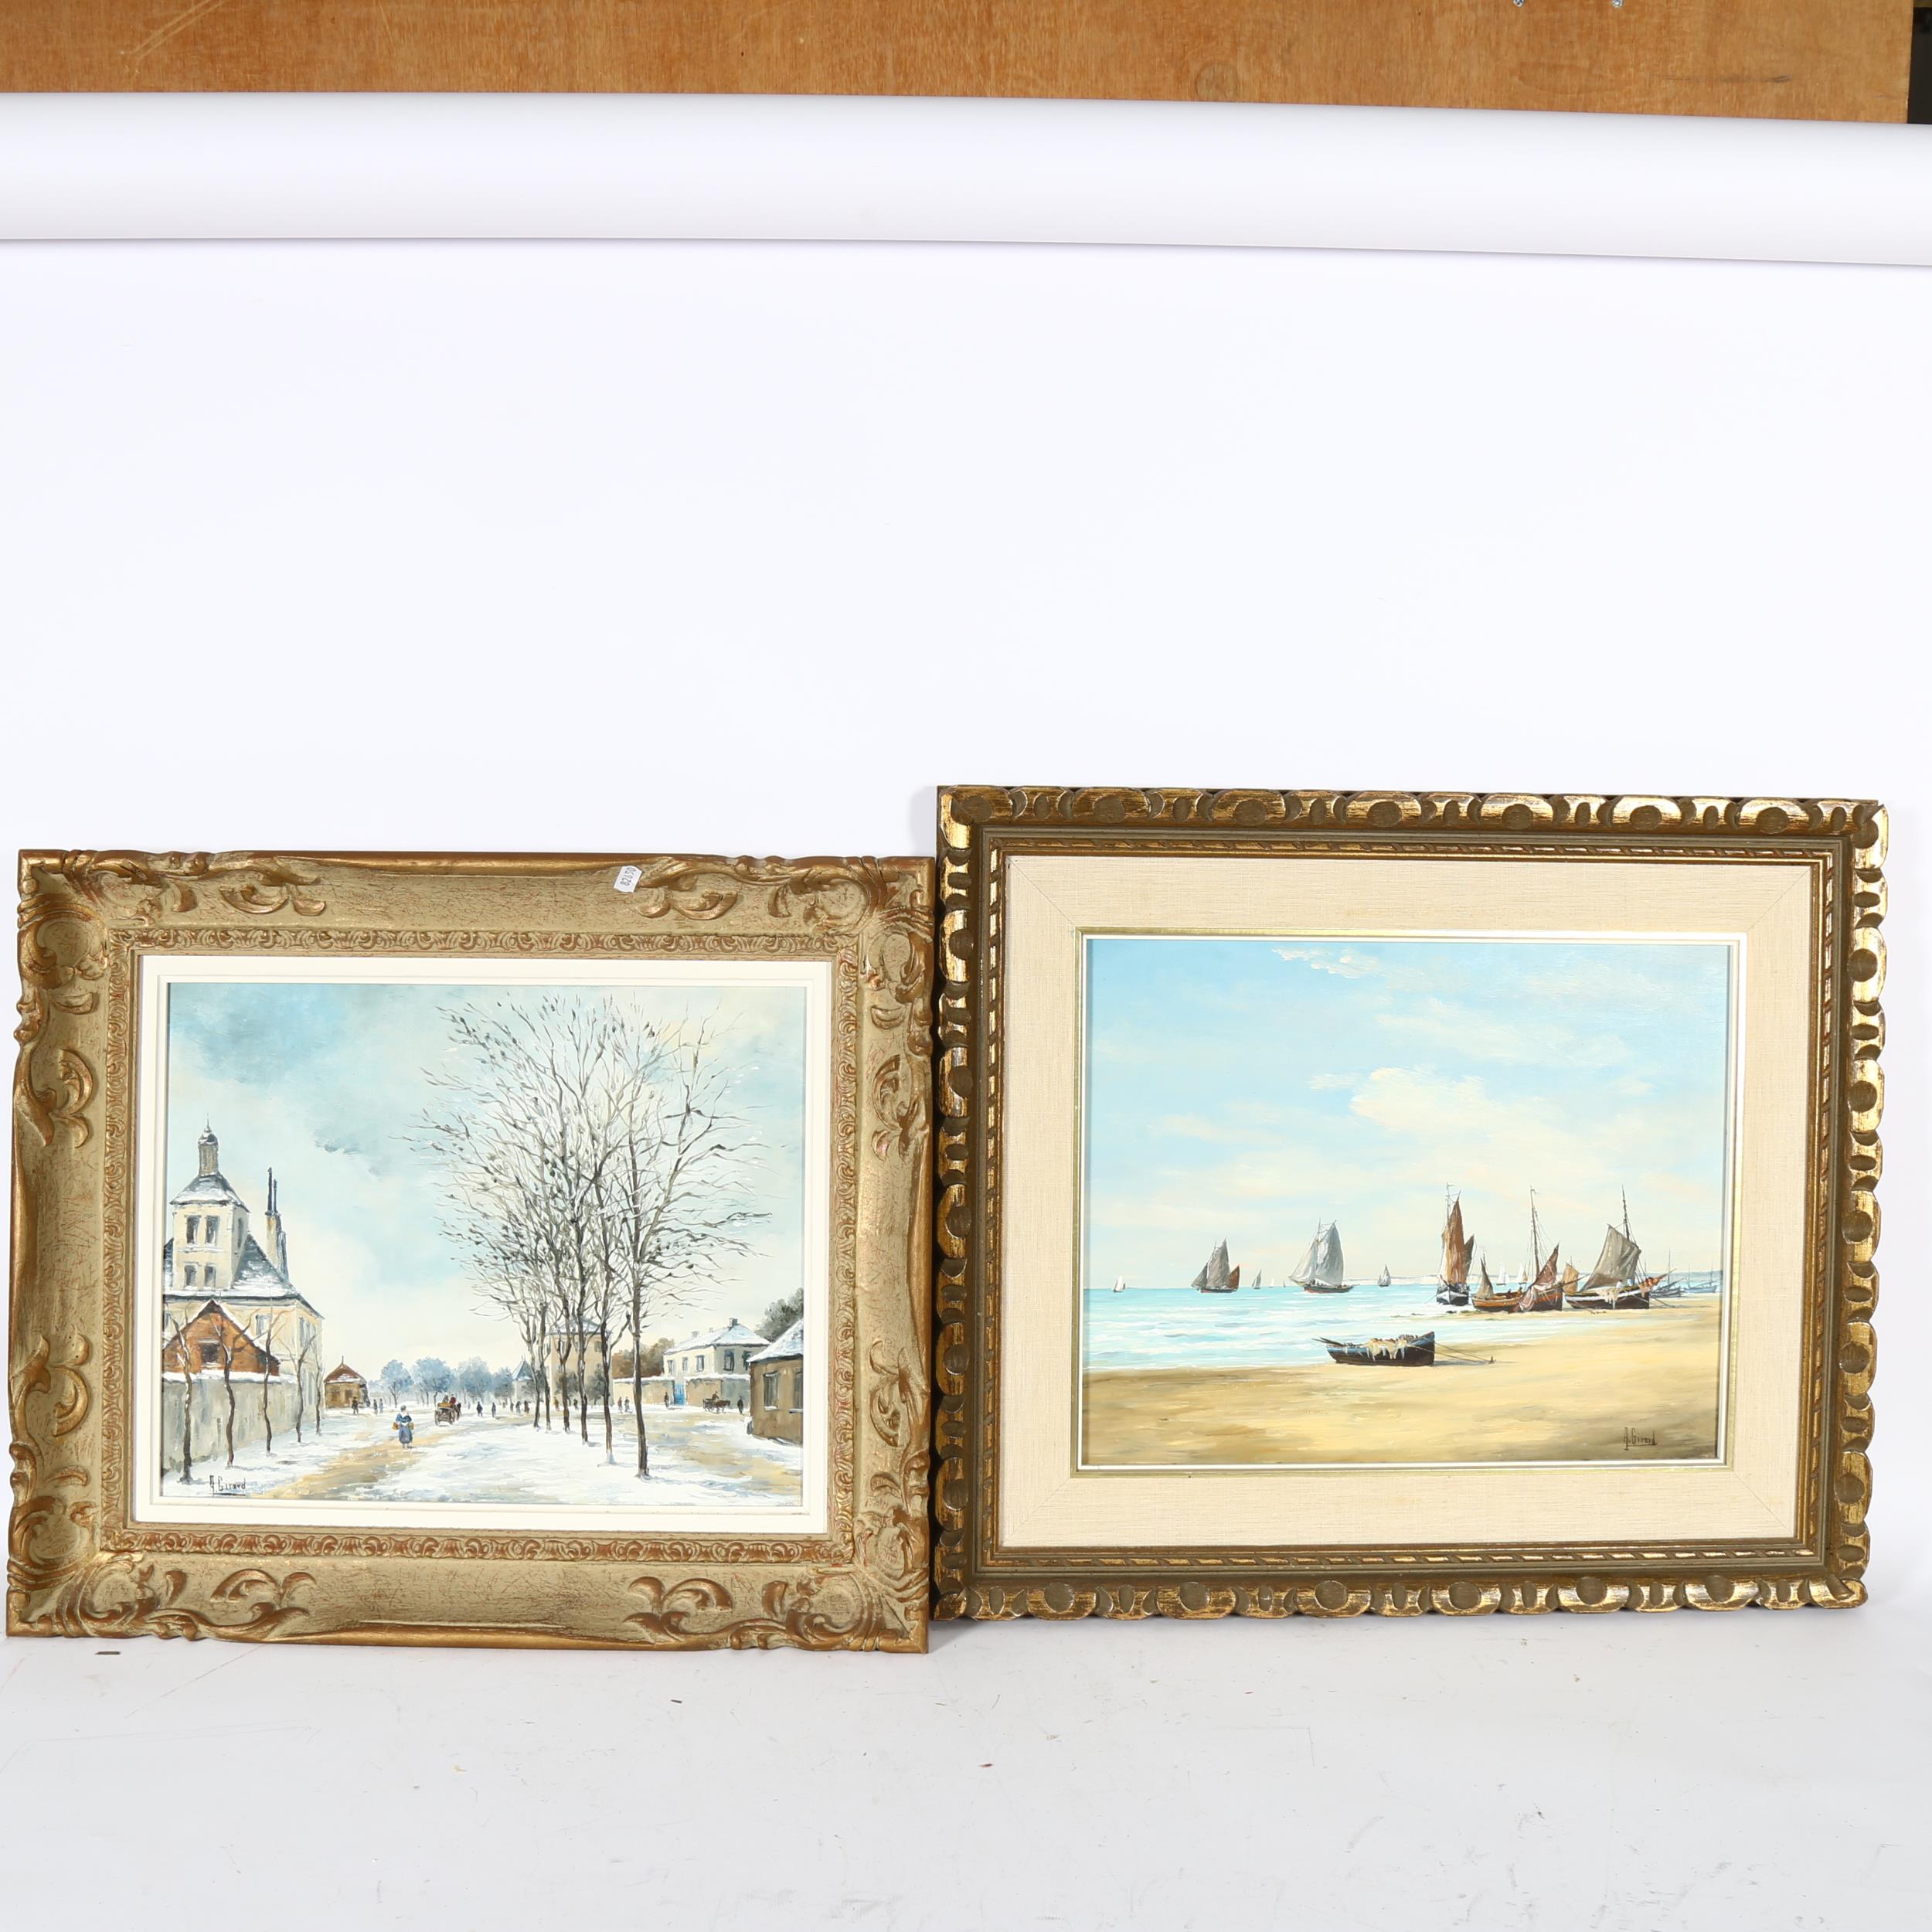 A Girard, 2 oils on canvas, snow swept street scene, and beached fishing boats, both with